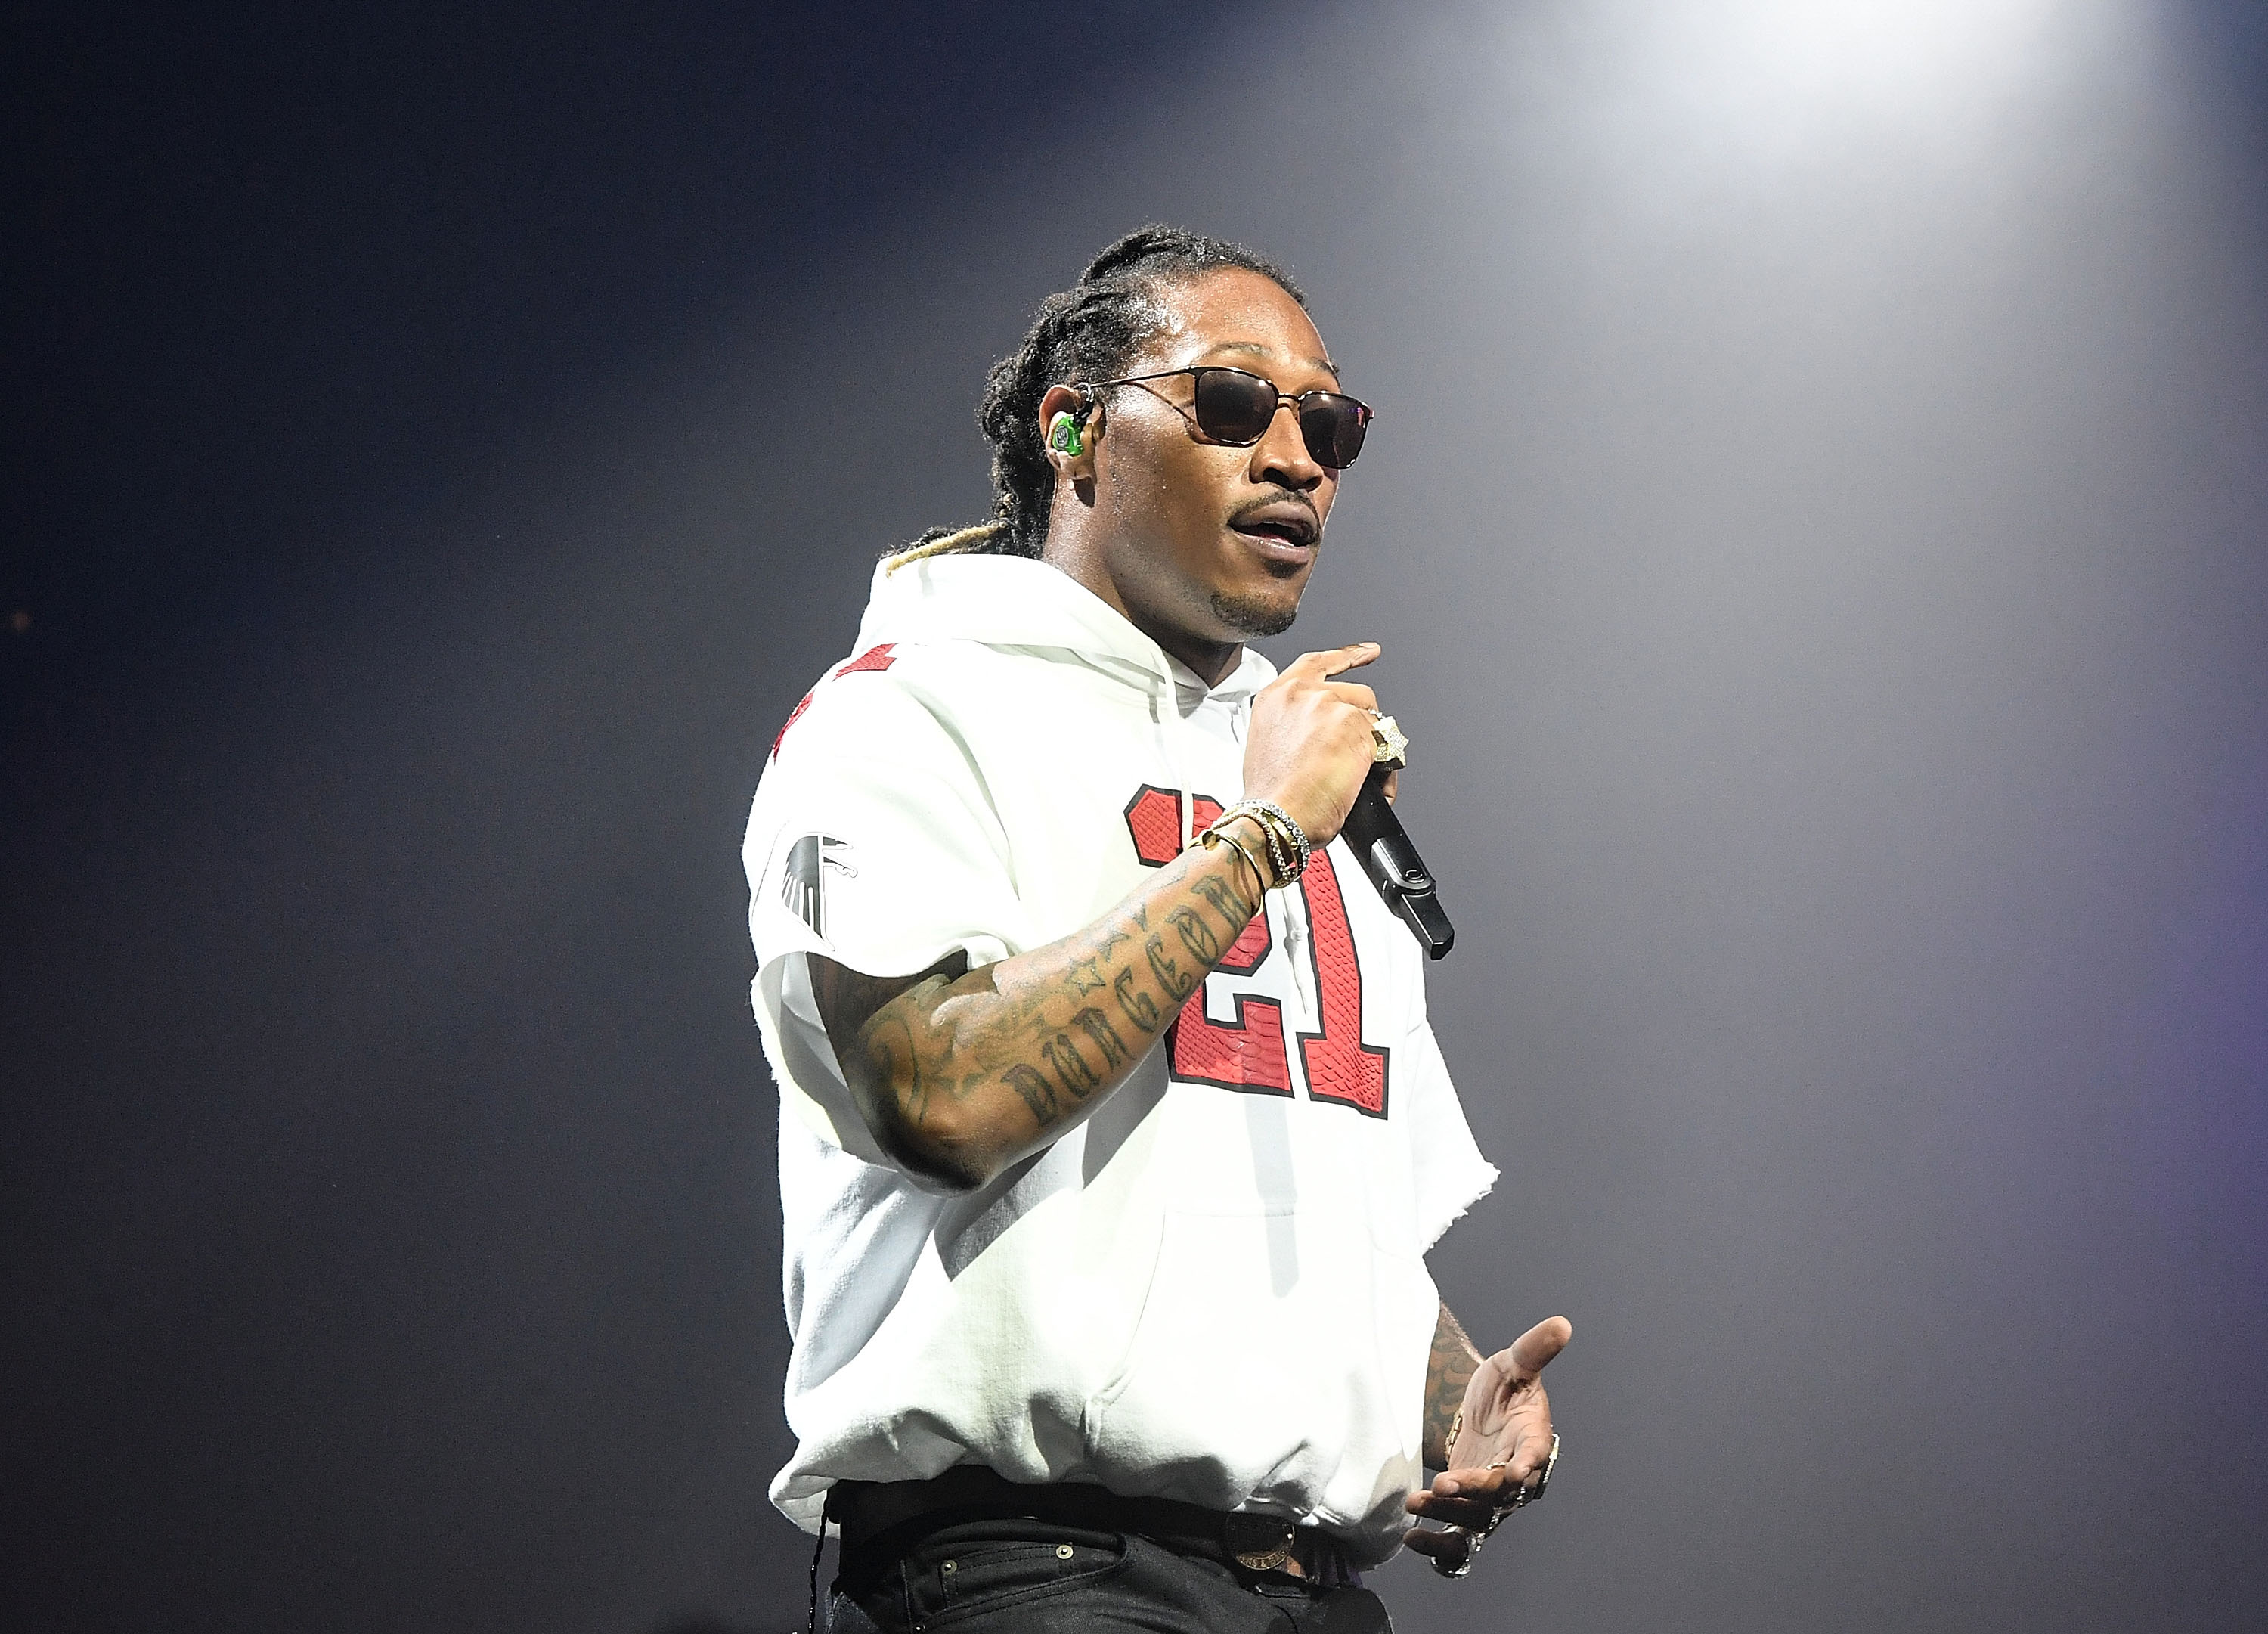 Future Brings Out T.I. And DaBaby For Charlotte Of One Big Party